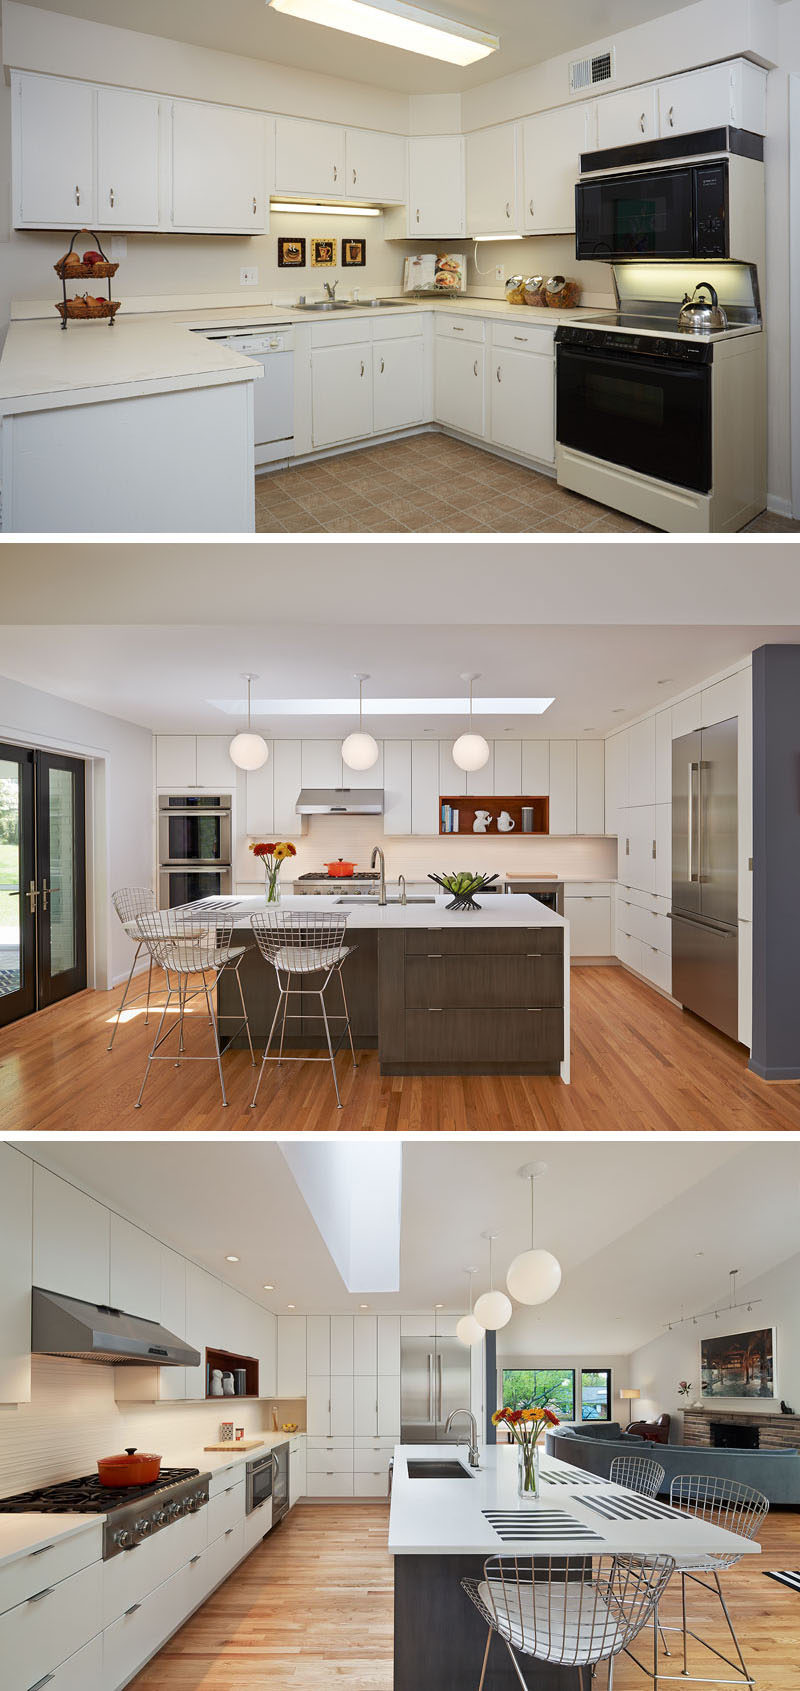 BEFORE & AFTER - The kitchen was renovated to reflect stylish, mid-century modern design. Floor-to-ceiling cabinets provide essential storage, and a long island serves as place to prep and dine. Bertoia barstools and light hardwood floors complete the fresh, open design.